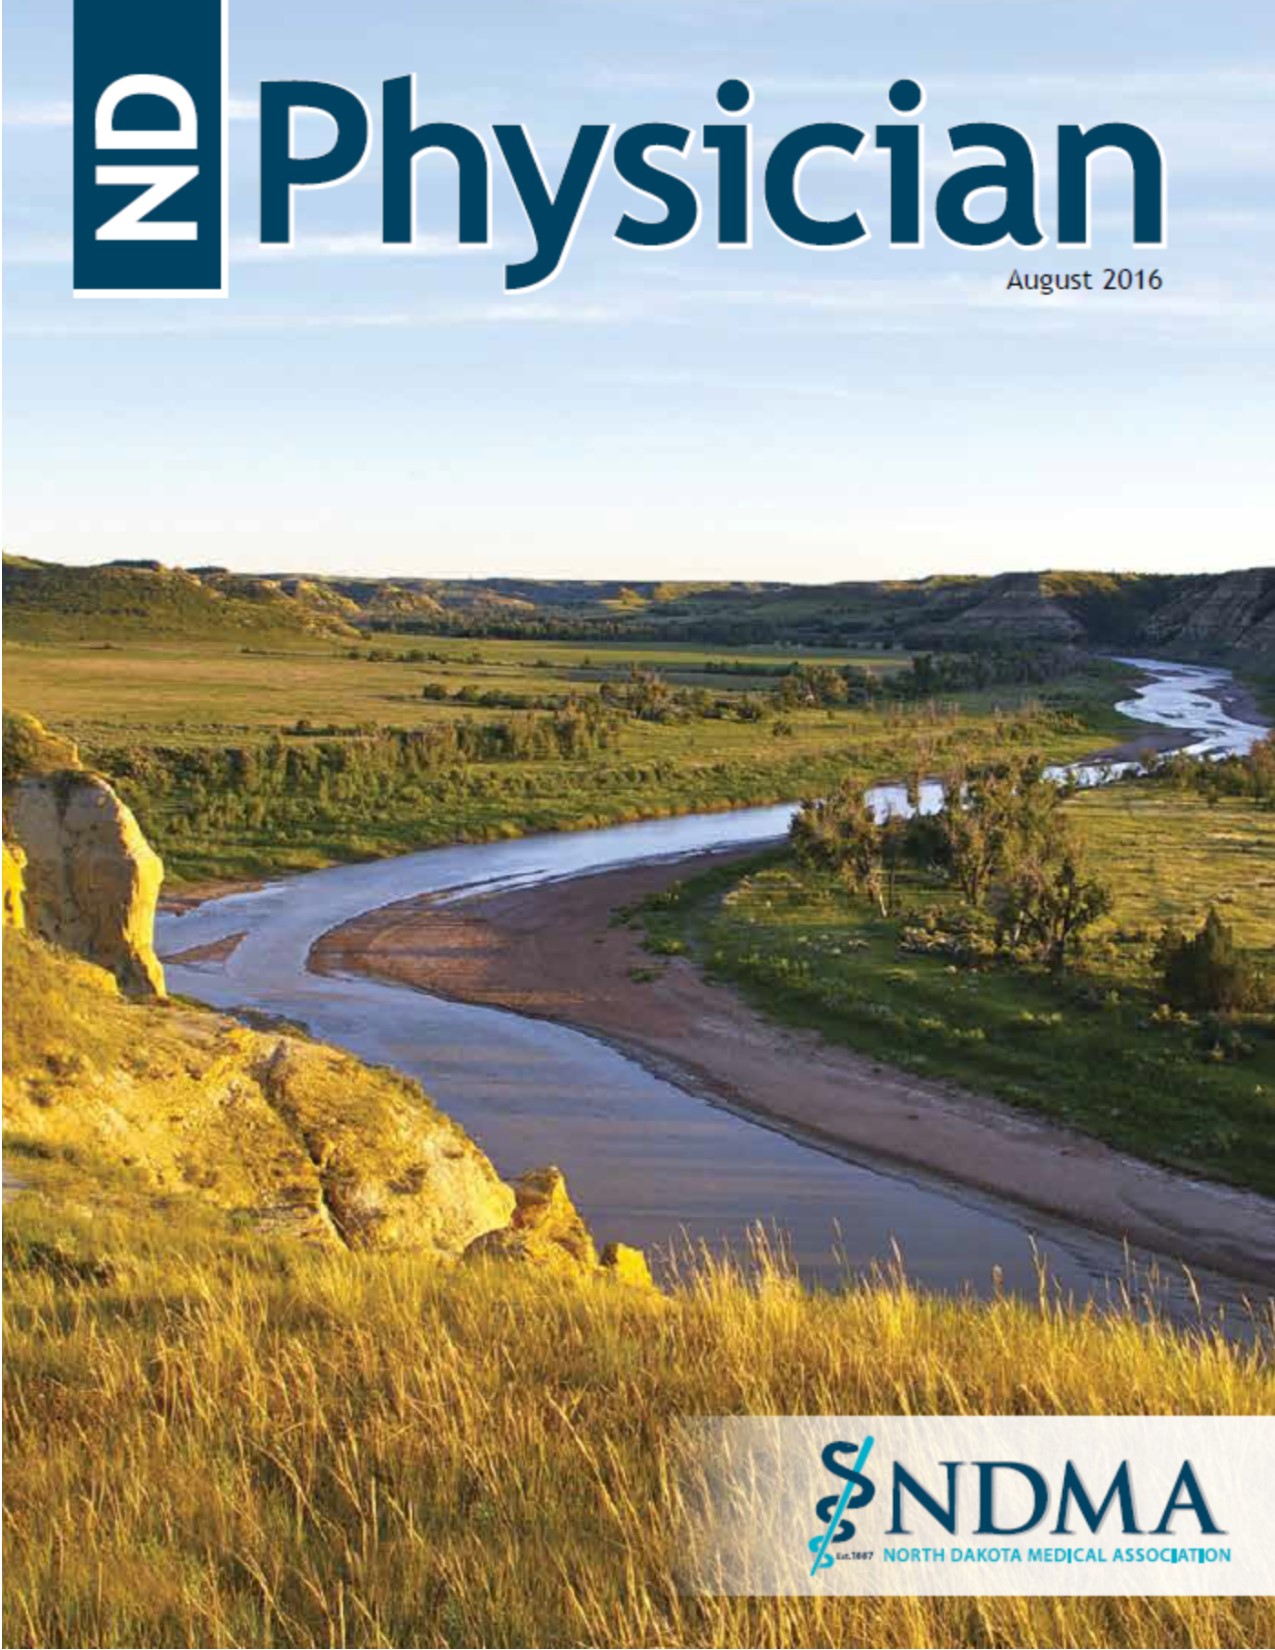 ND Physician August 2016 magazine cover